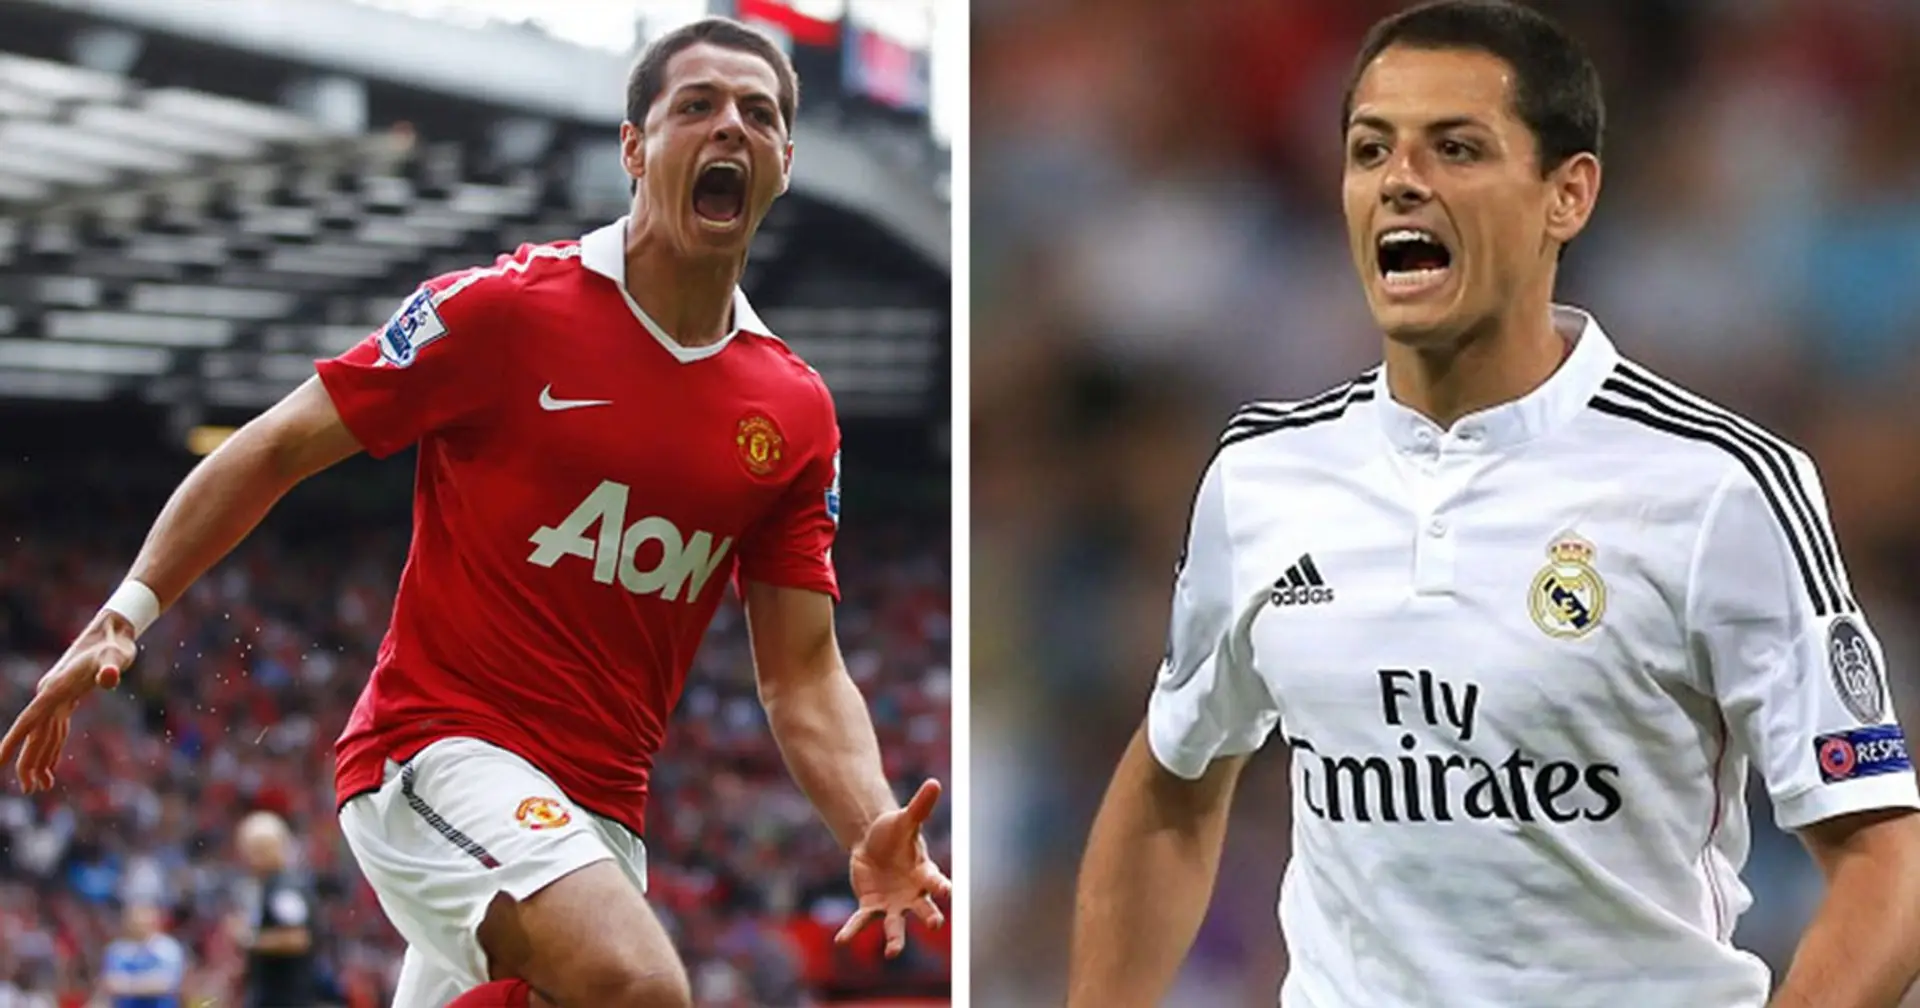 Javier Hernandez points out major difference between playing for Real Madrid and United